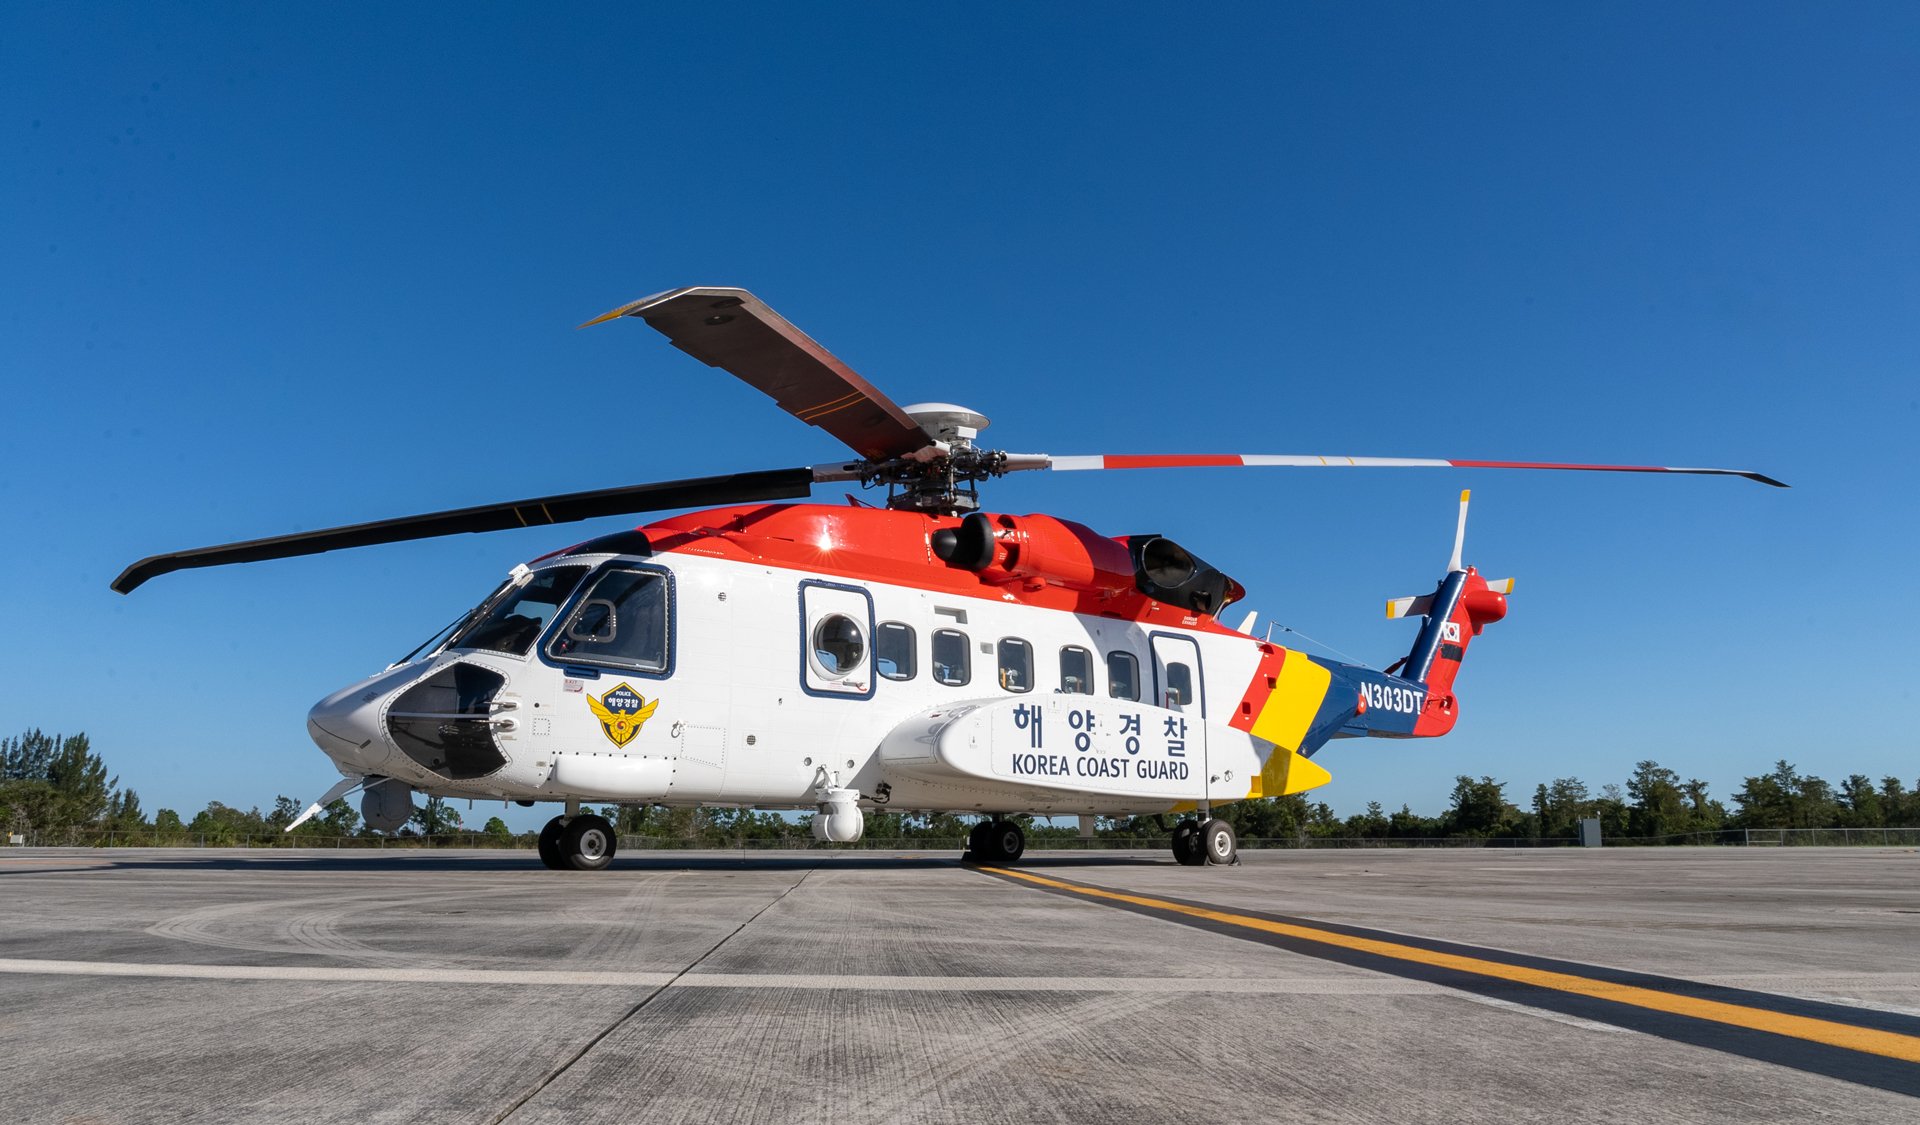 The third S-92 helicopter was delivered to the Korea Coast Guard, on track to deliver a fourth next year, increasing their capability to conduct maritime security, safety, and life-saving missions. Photo credit Sikorsky, a Lockheed Martin company.